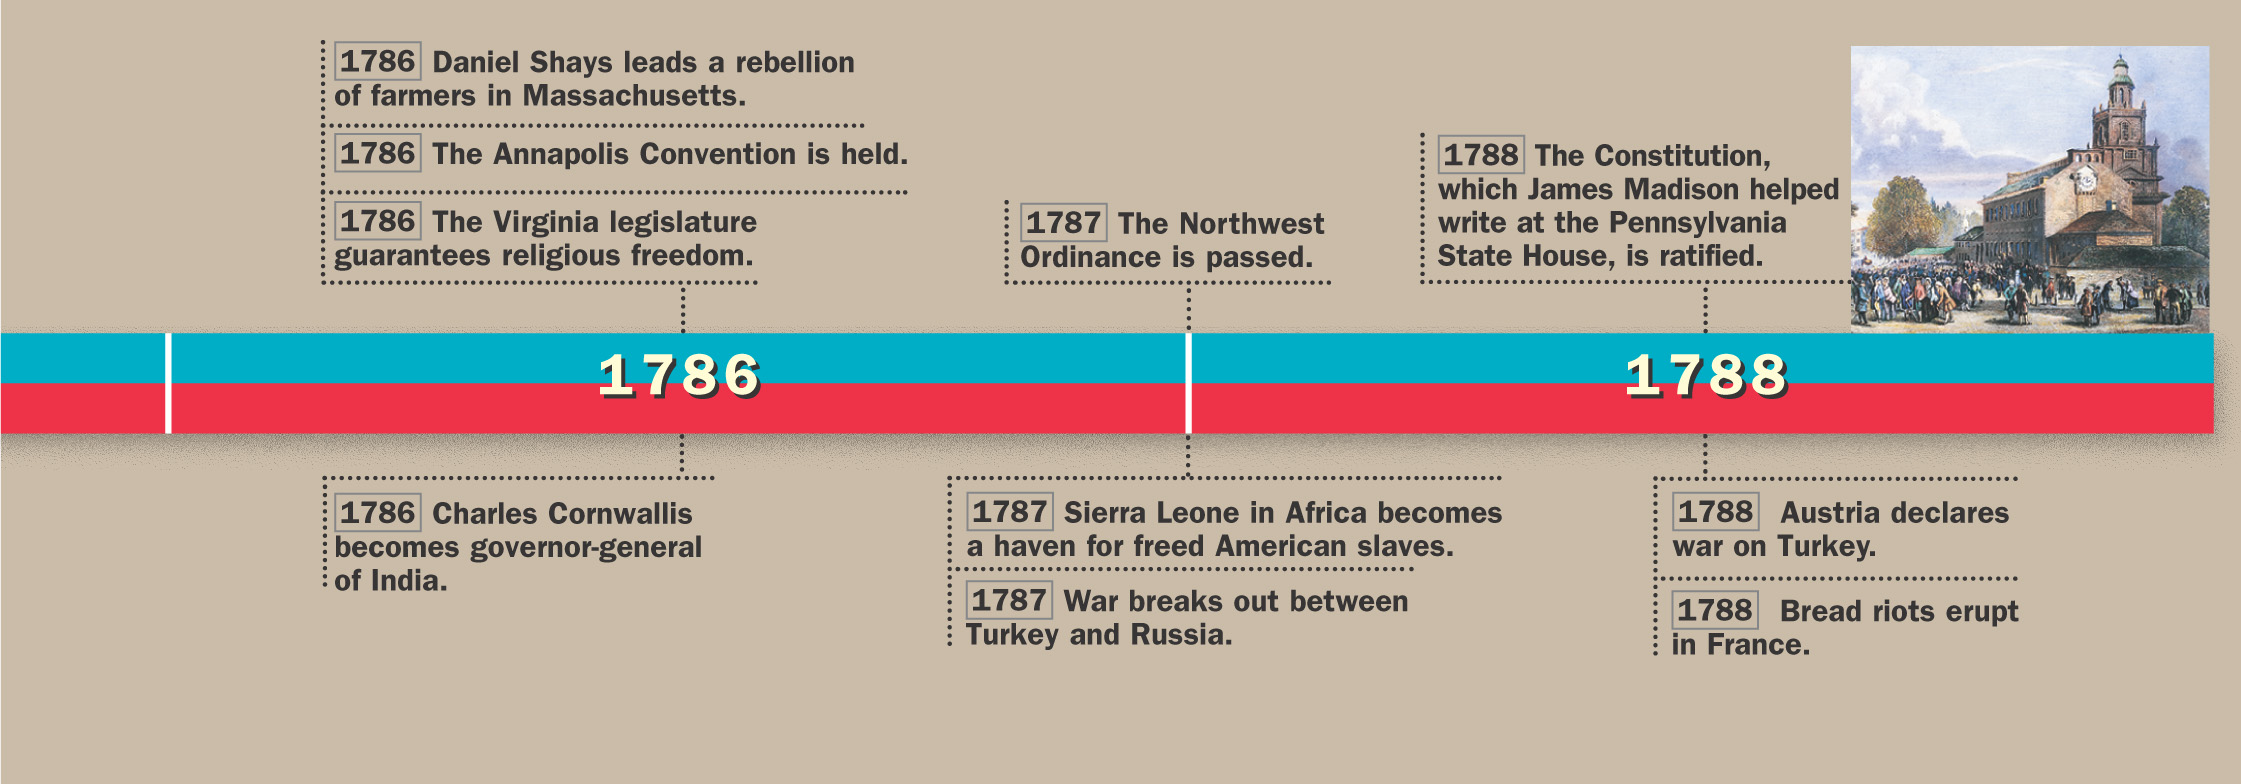 A timeline of historical event from 1782 to 1788 in both the U.S. and the world